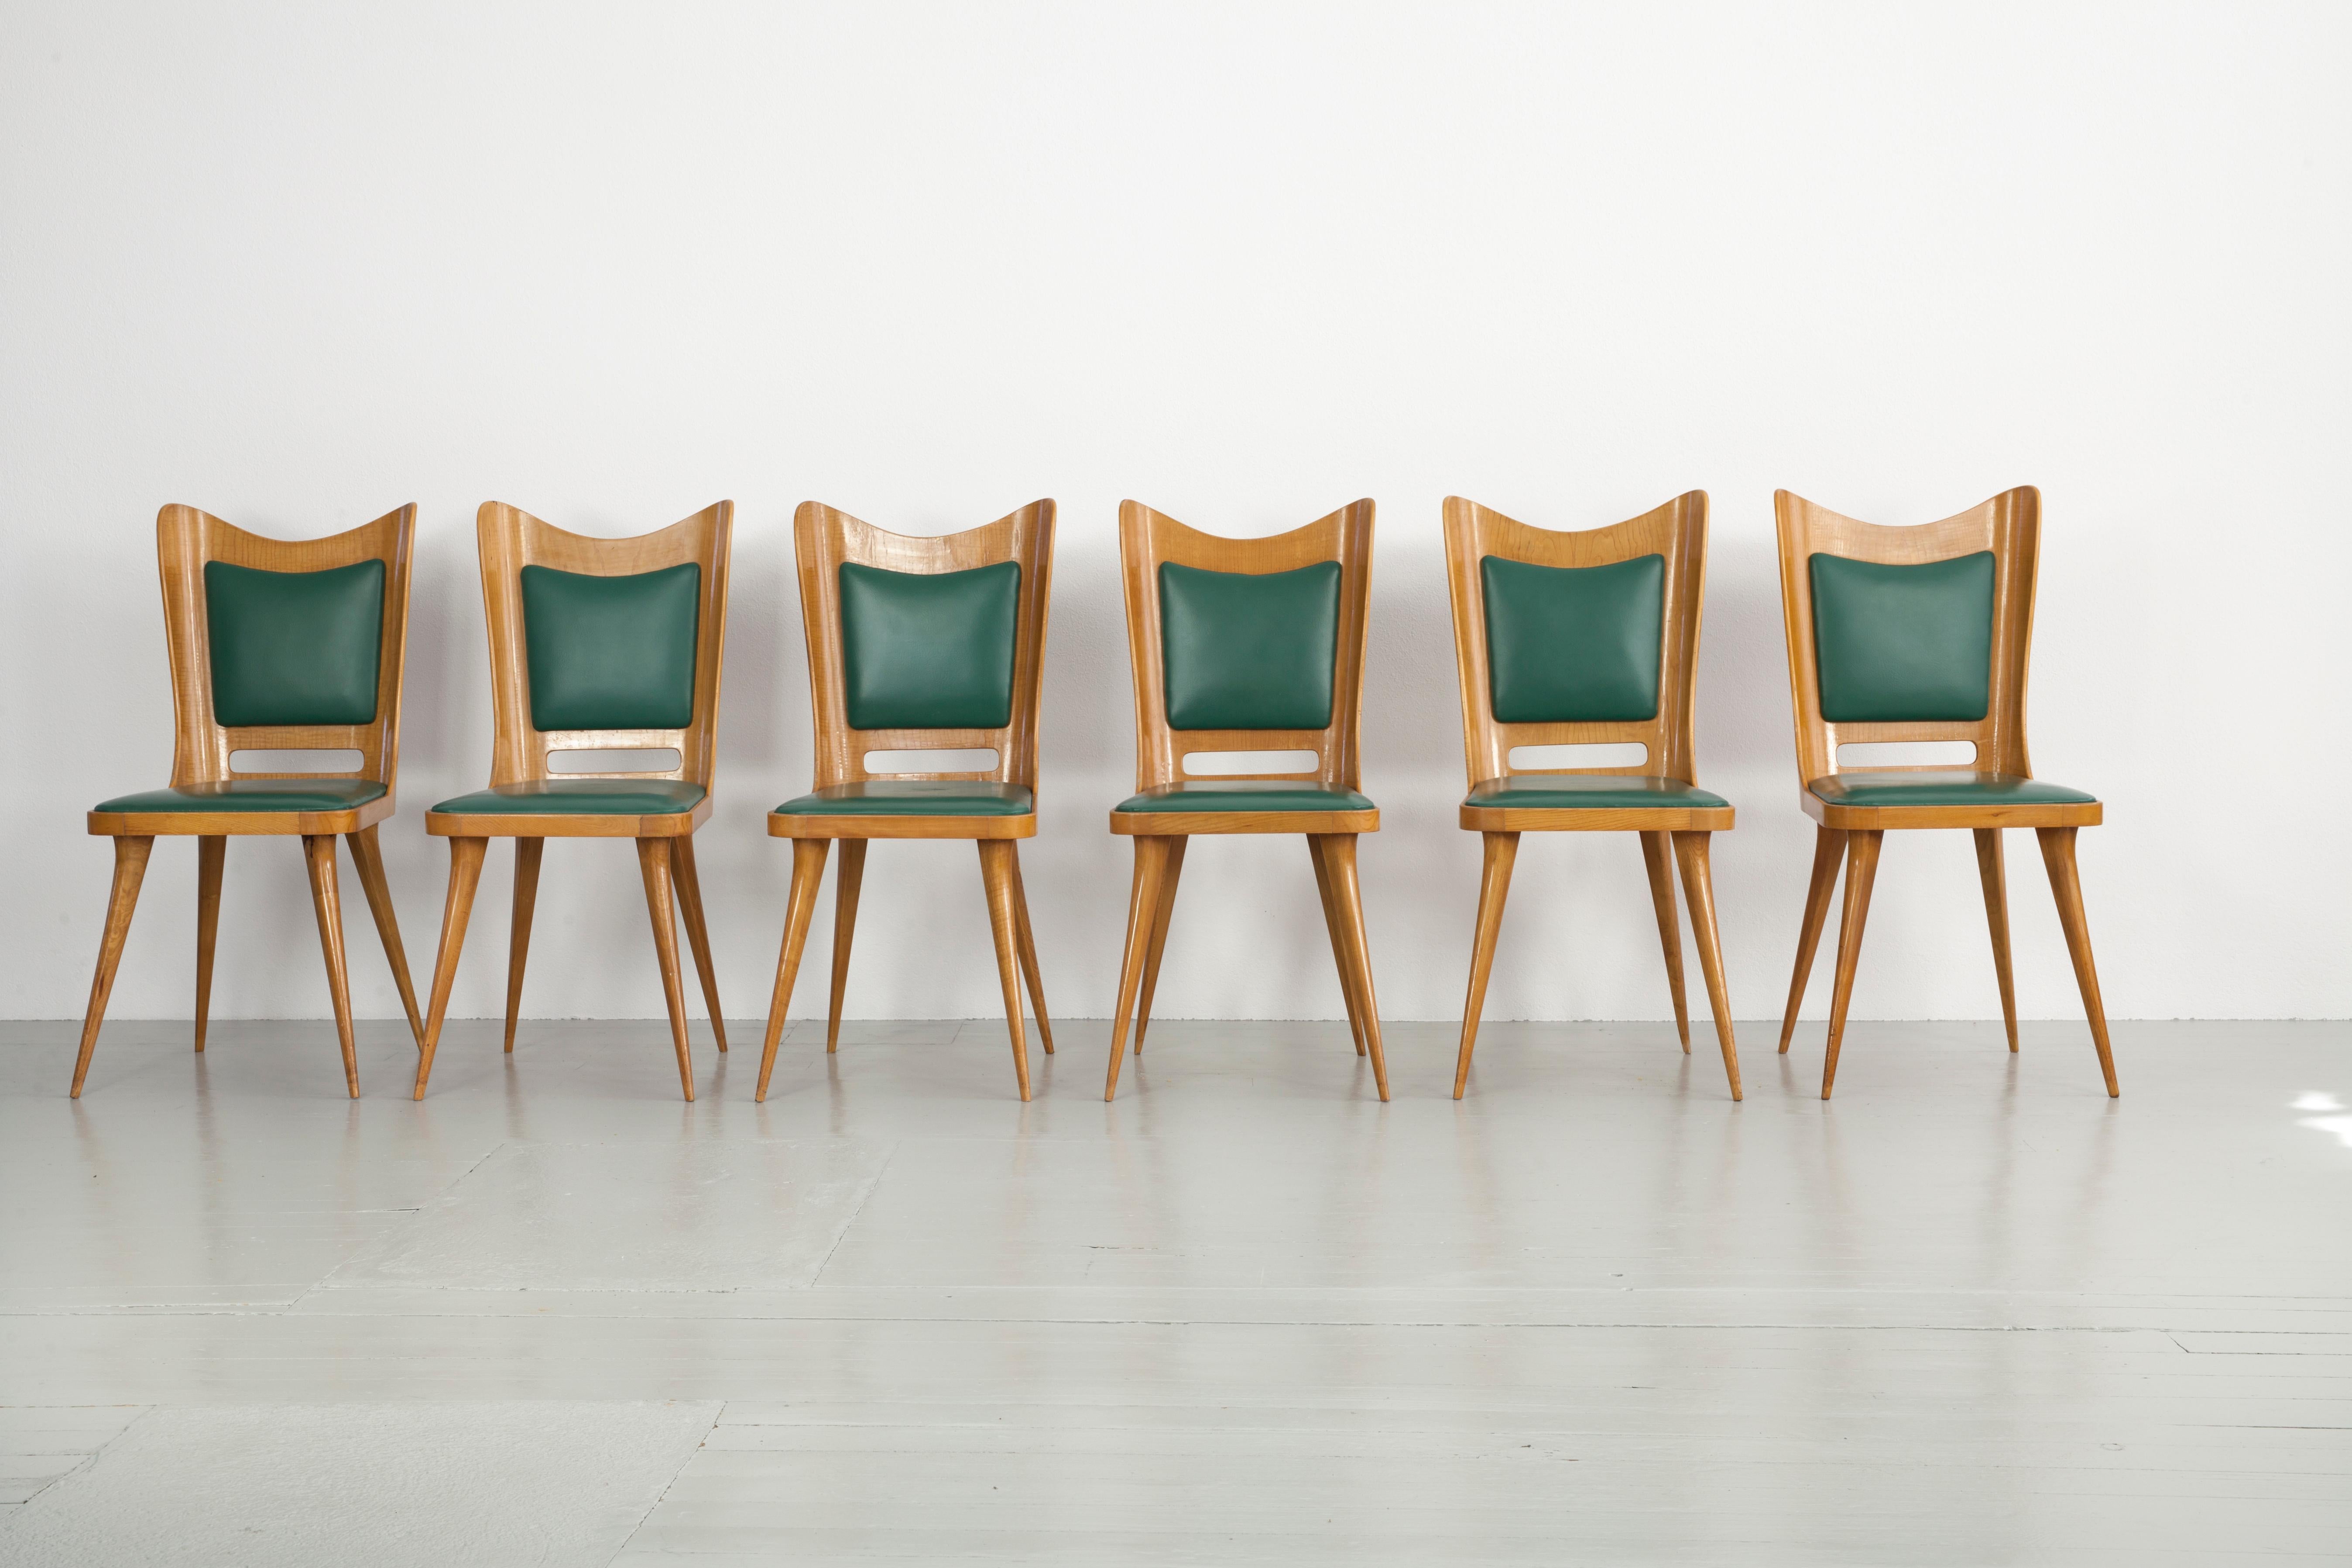 Set of Six Italian Wooden Dining Chairs with Green Upholstery, 1950 For Sale 3